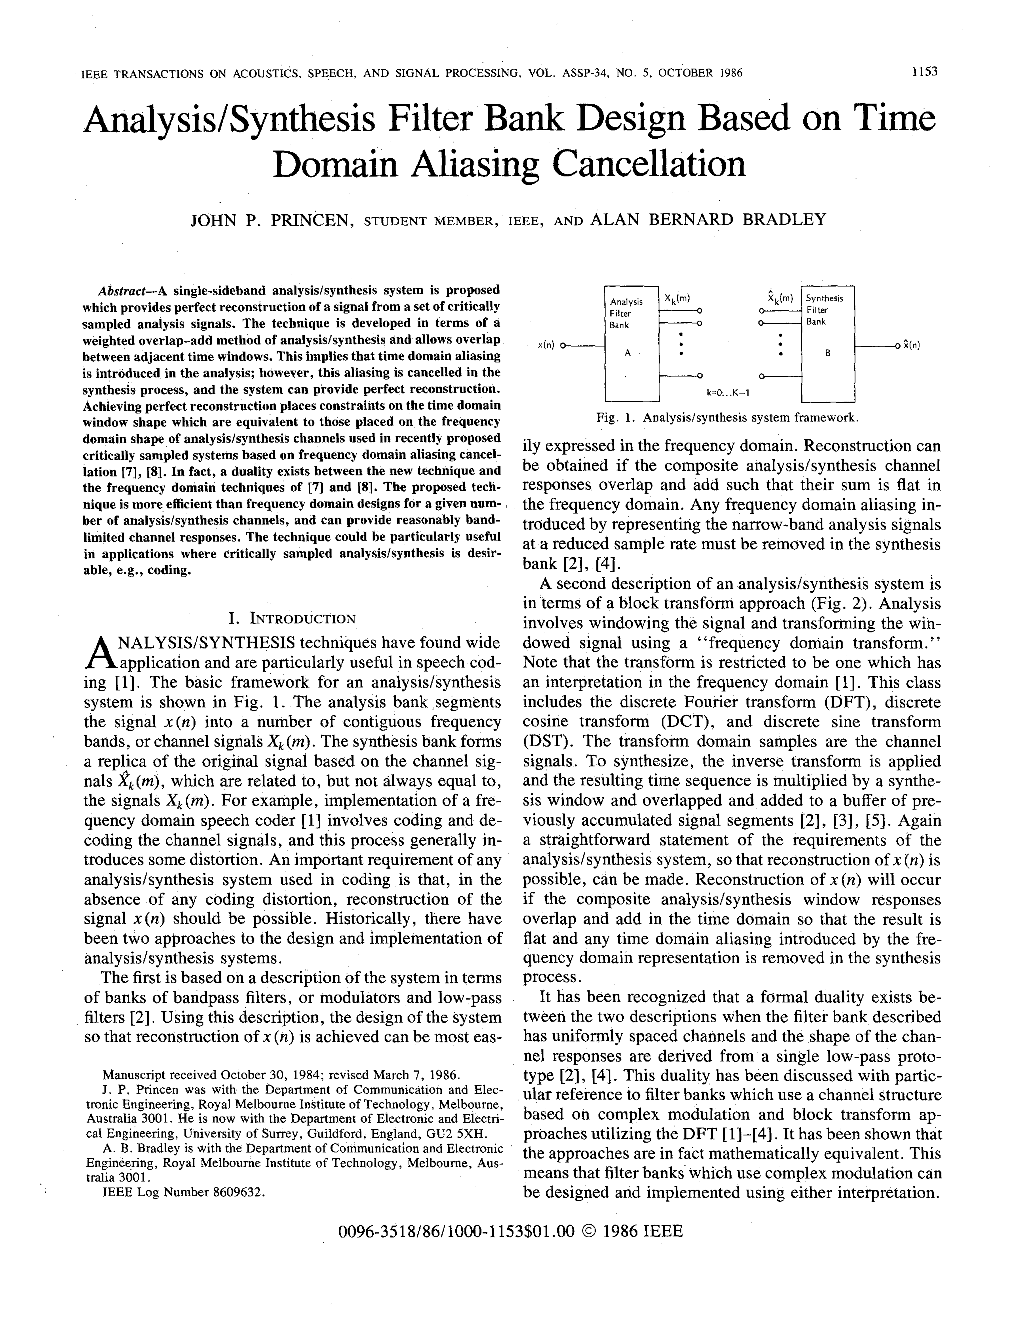 Analysis/Synthesis Filter Bank Design Based on Time Domain Aliasing Cancellation